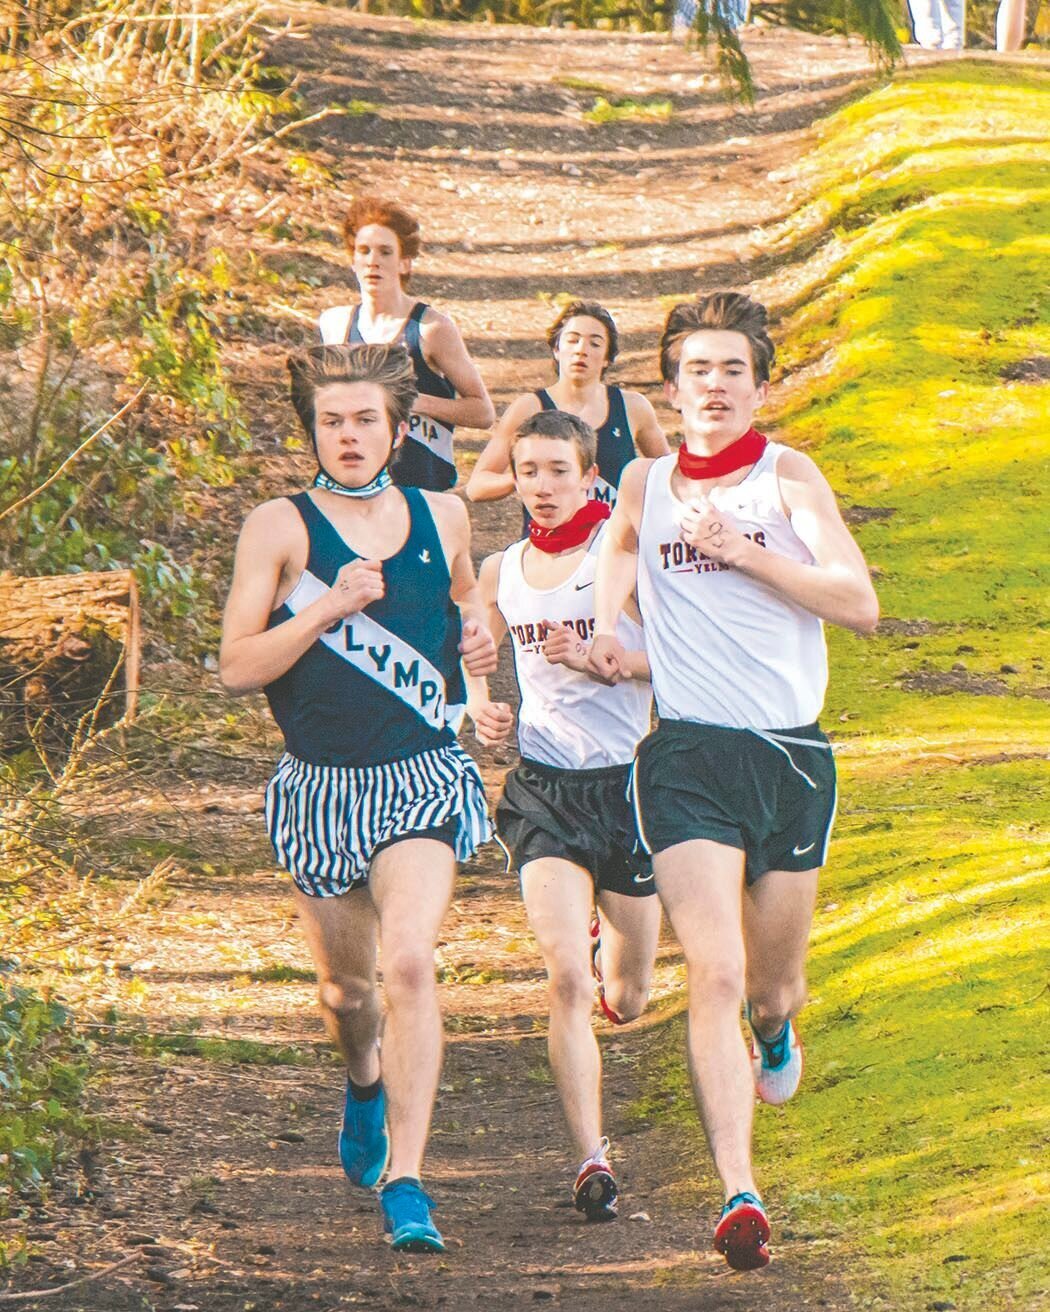 Ryan Lange makes his way down a hill during a cross-country meet at LBA Park in Olympia.